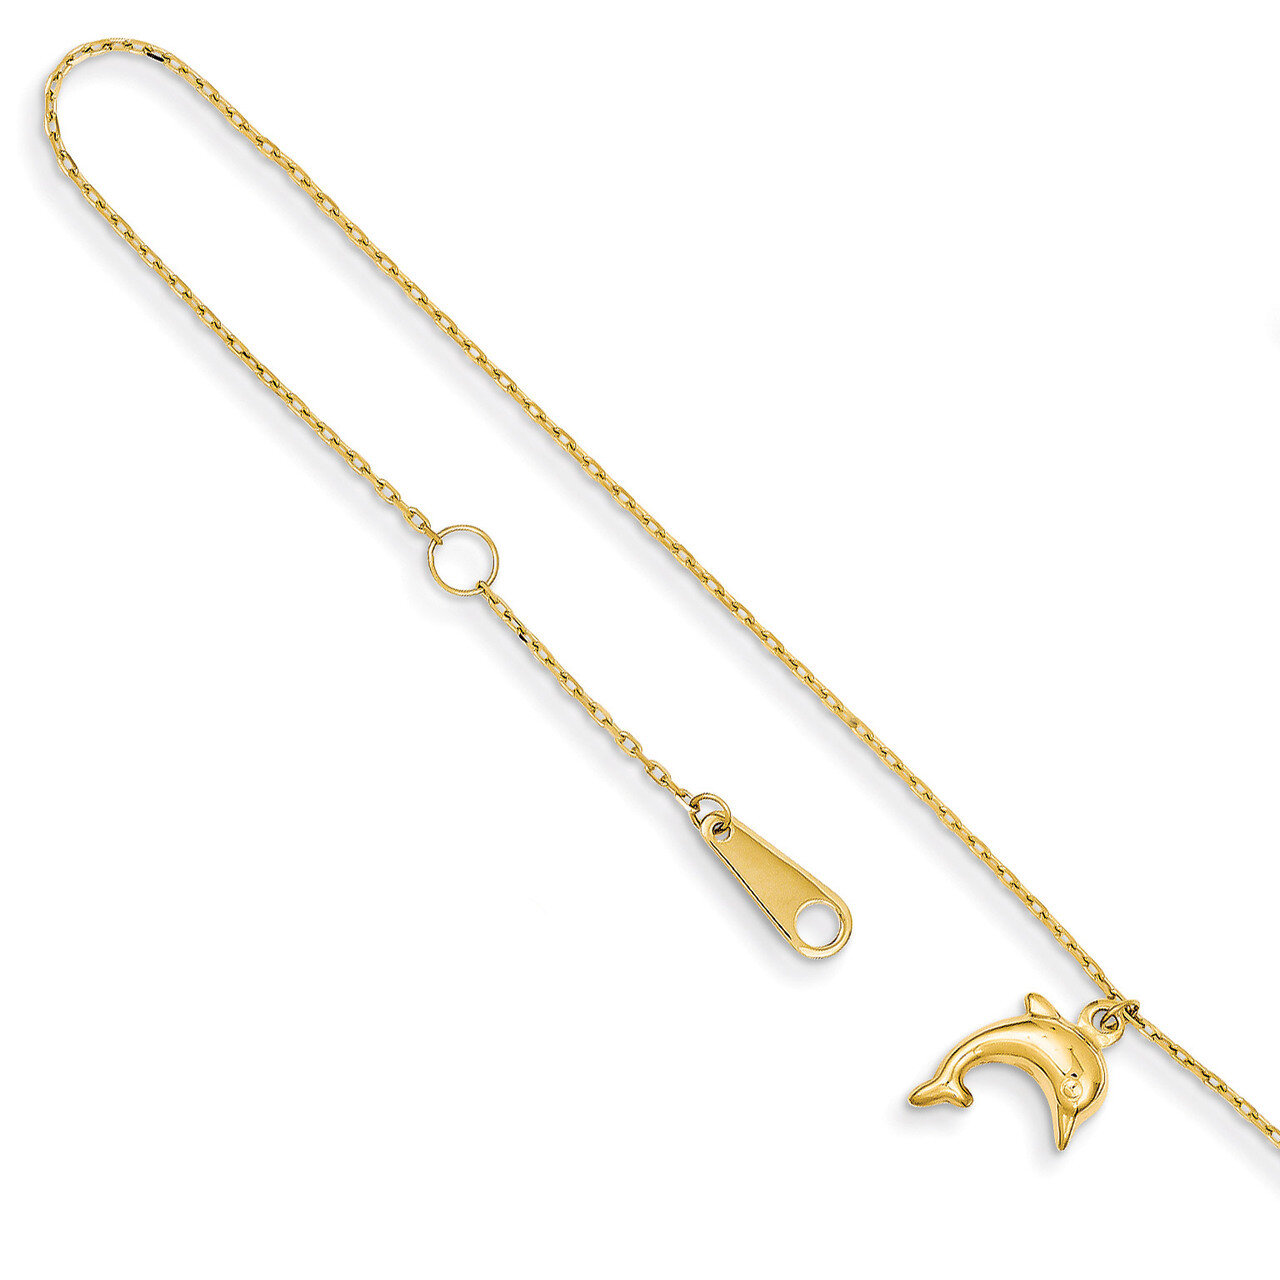 Dolphin Charm with 1 inch Extension Anklet 10 Inch 14k Gold ANK231-10